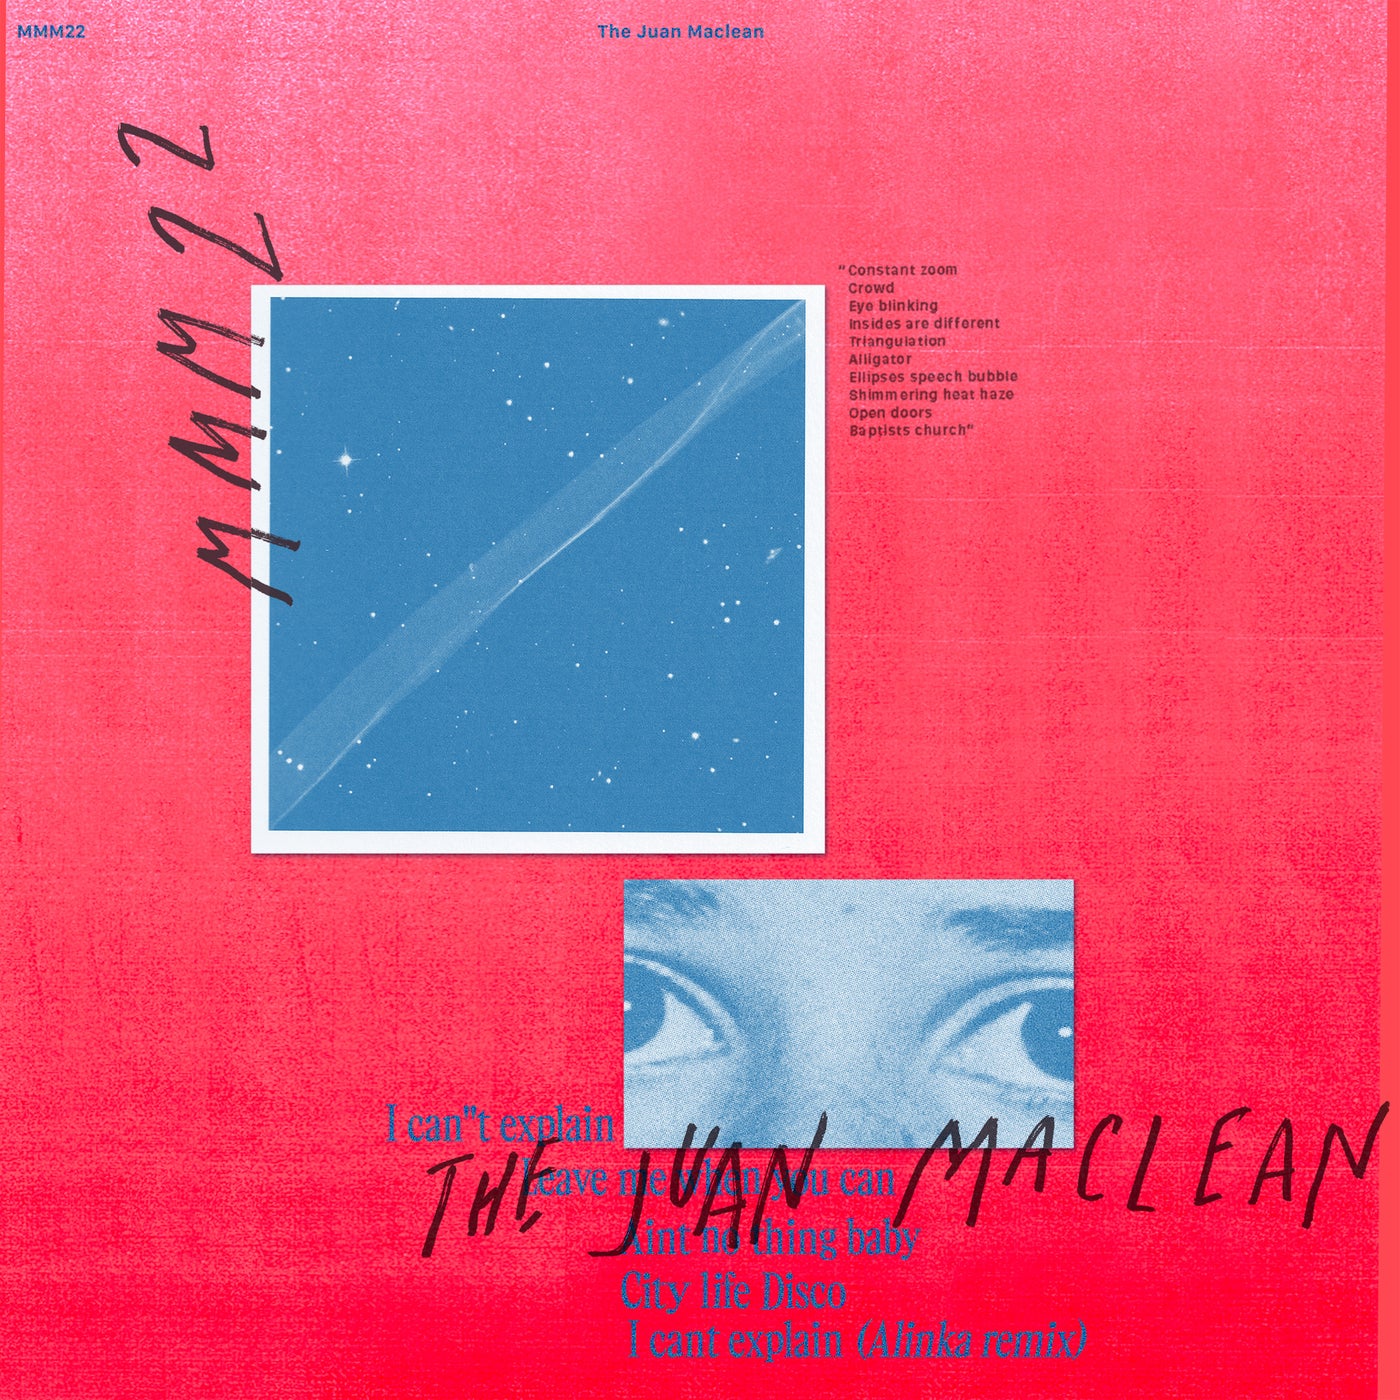 image cover: The Juan Maclean - I Can't Explain / MMM22